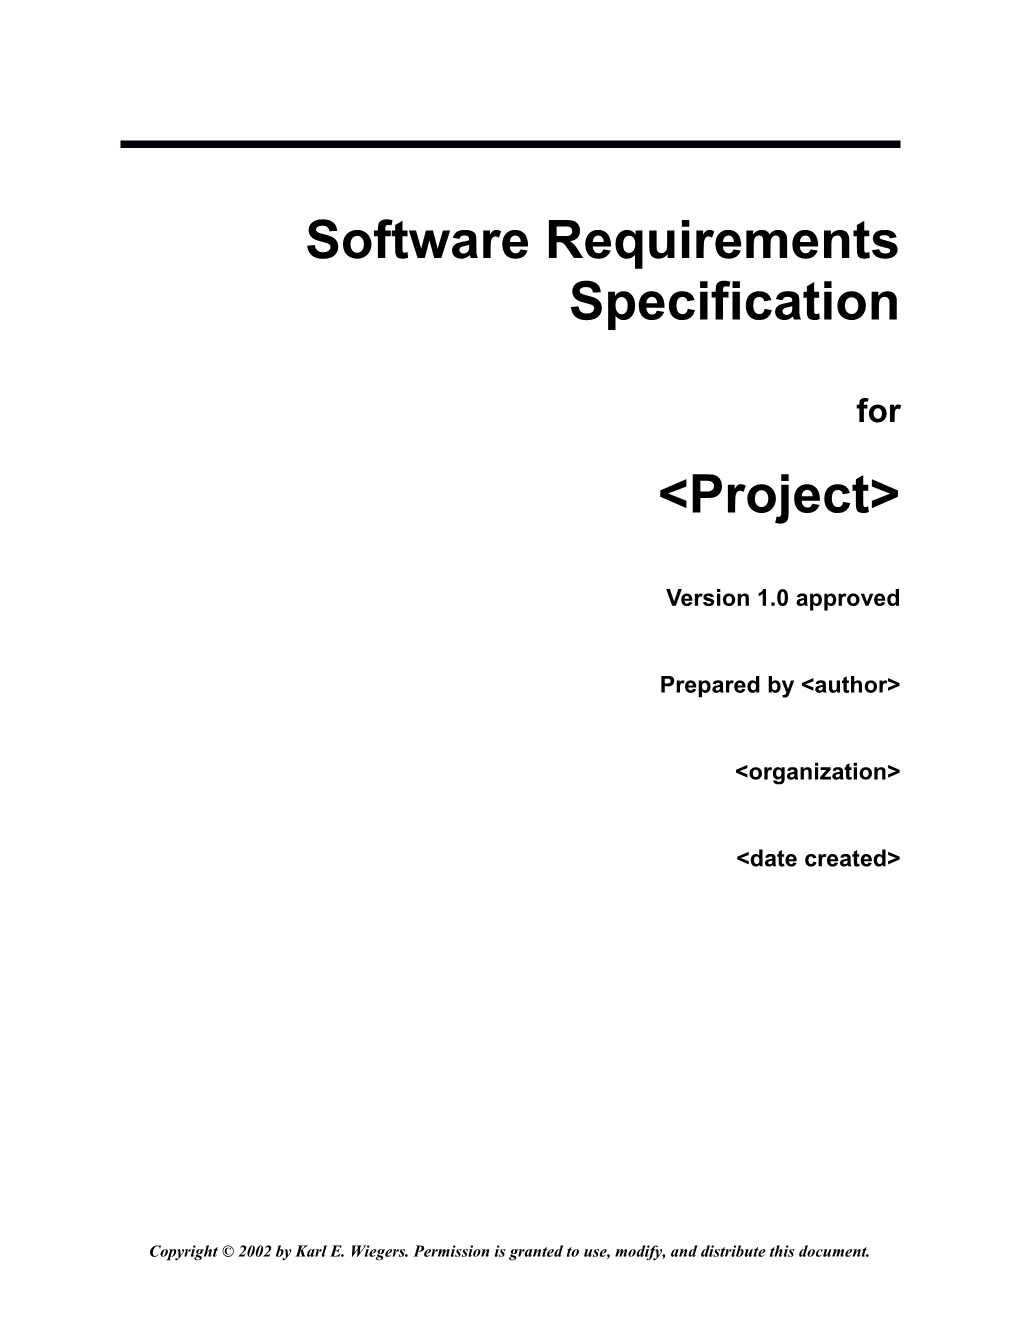 Software Requirements Specification Template s2